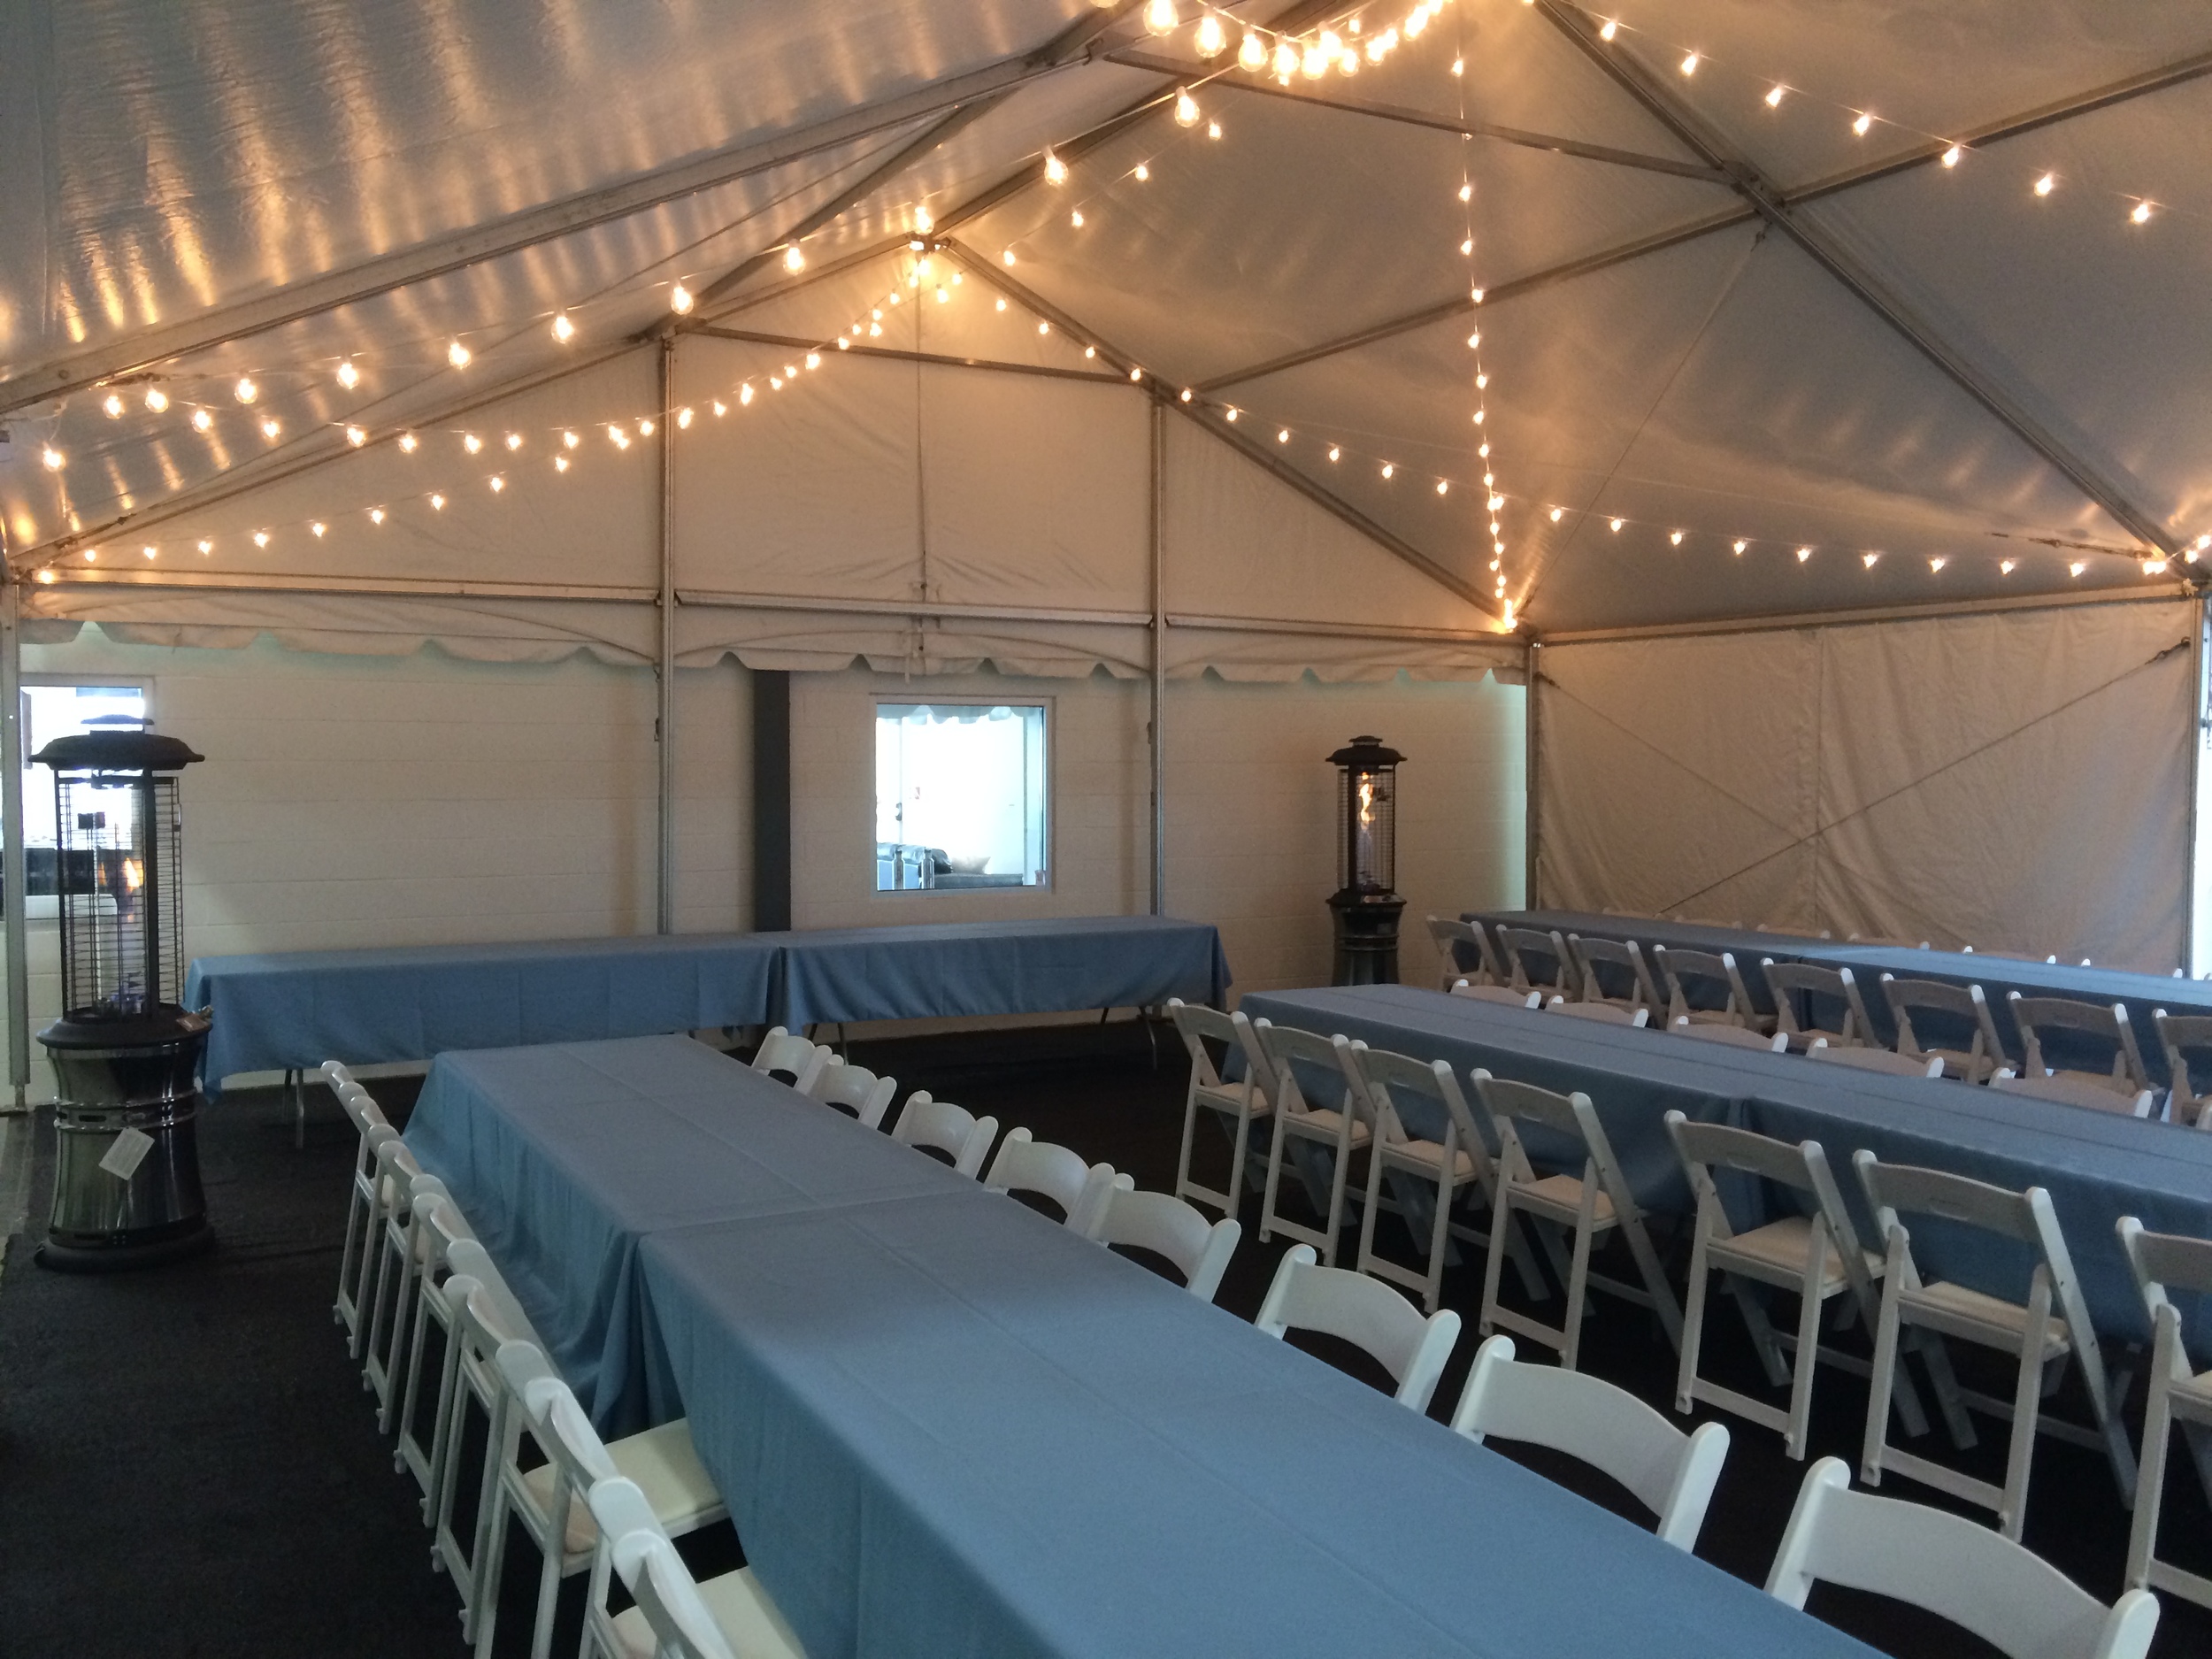 White padded chairs and 8' banquet tables